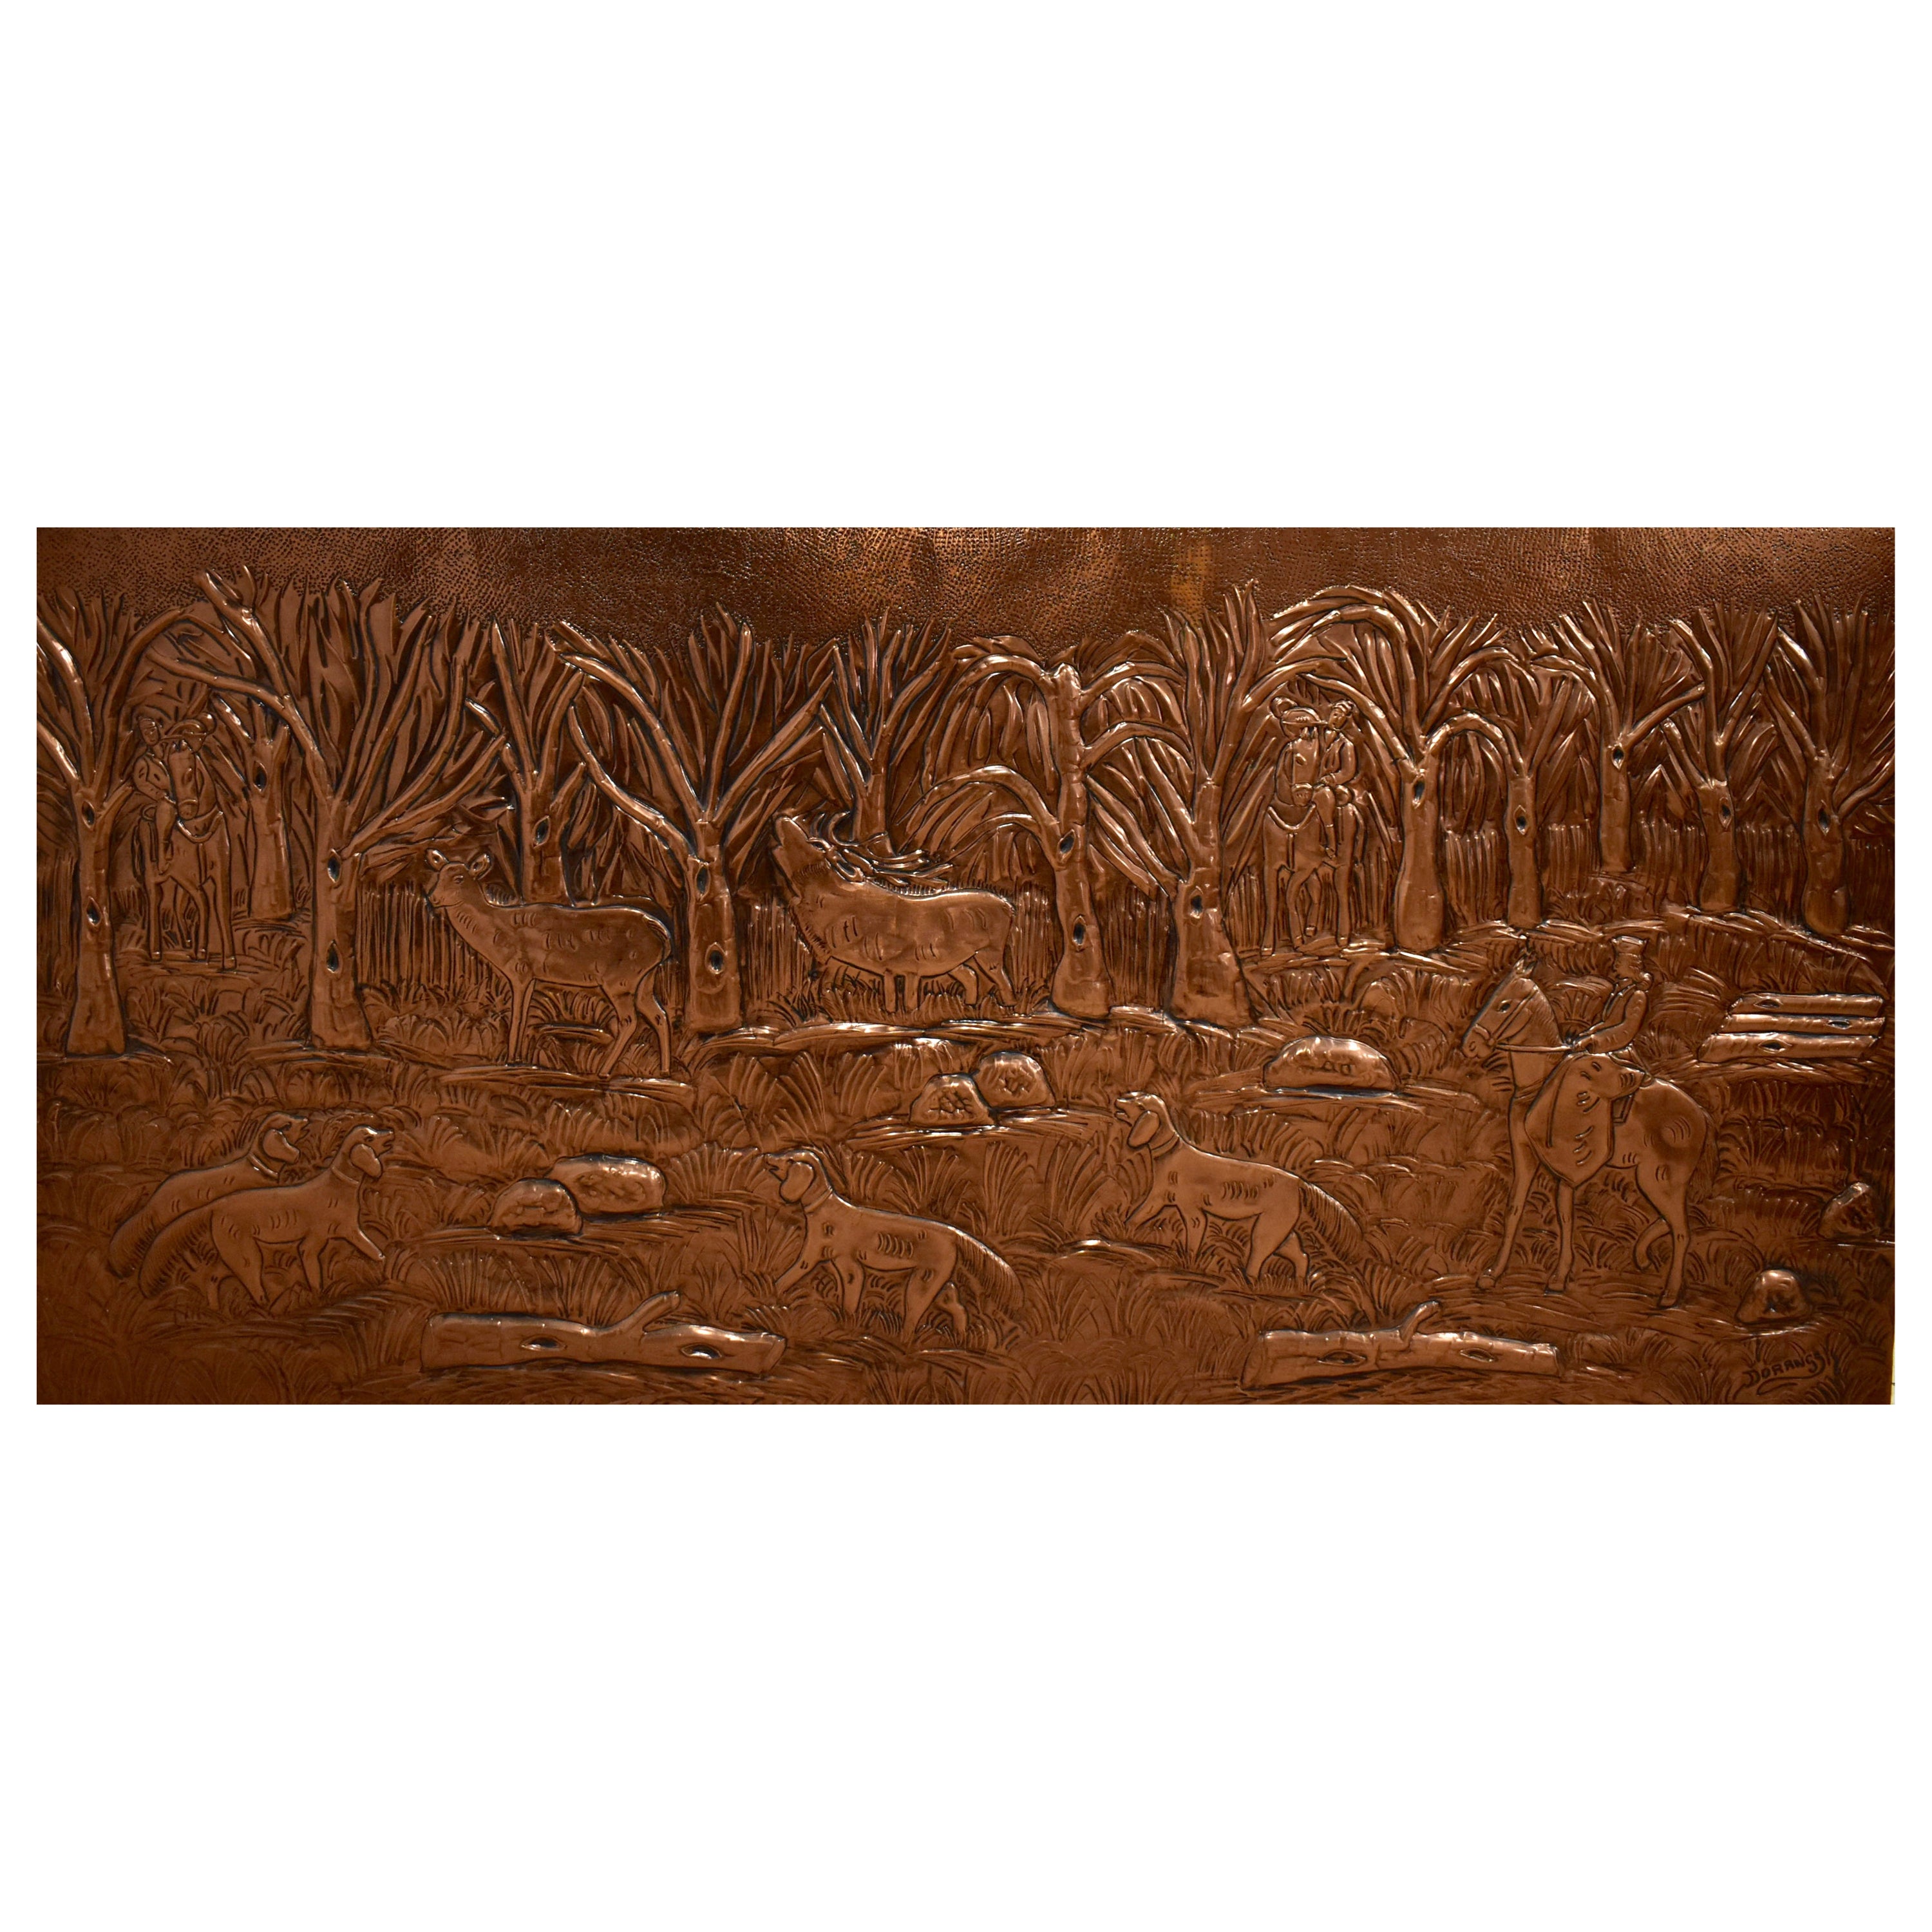 Substantial Decorative Copper Panel with Hunt Scene For Sale